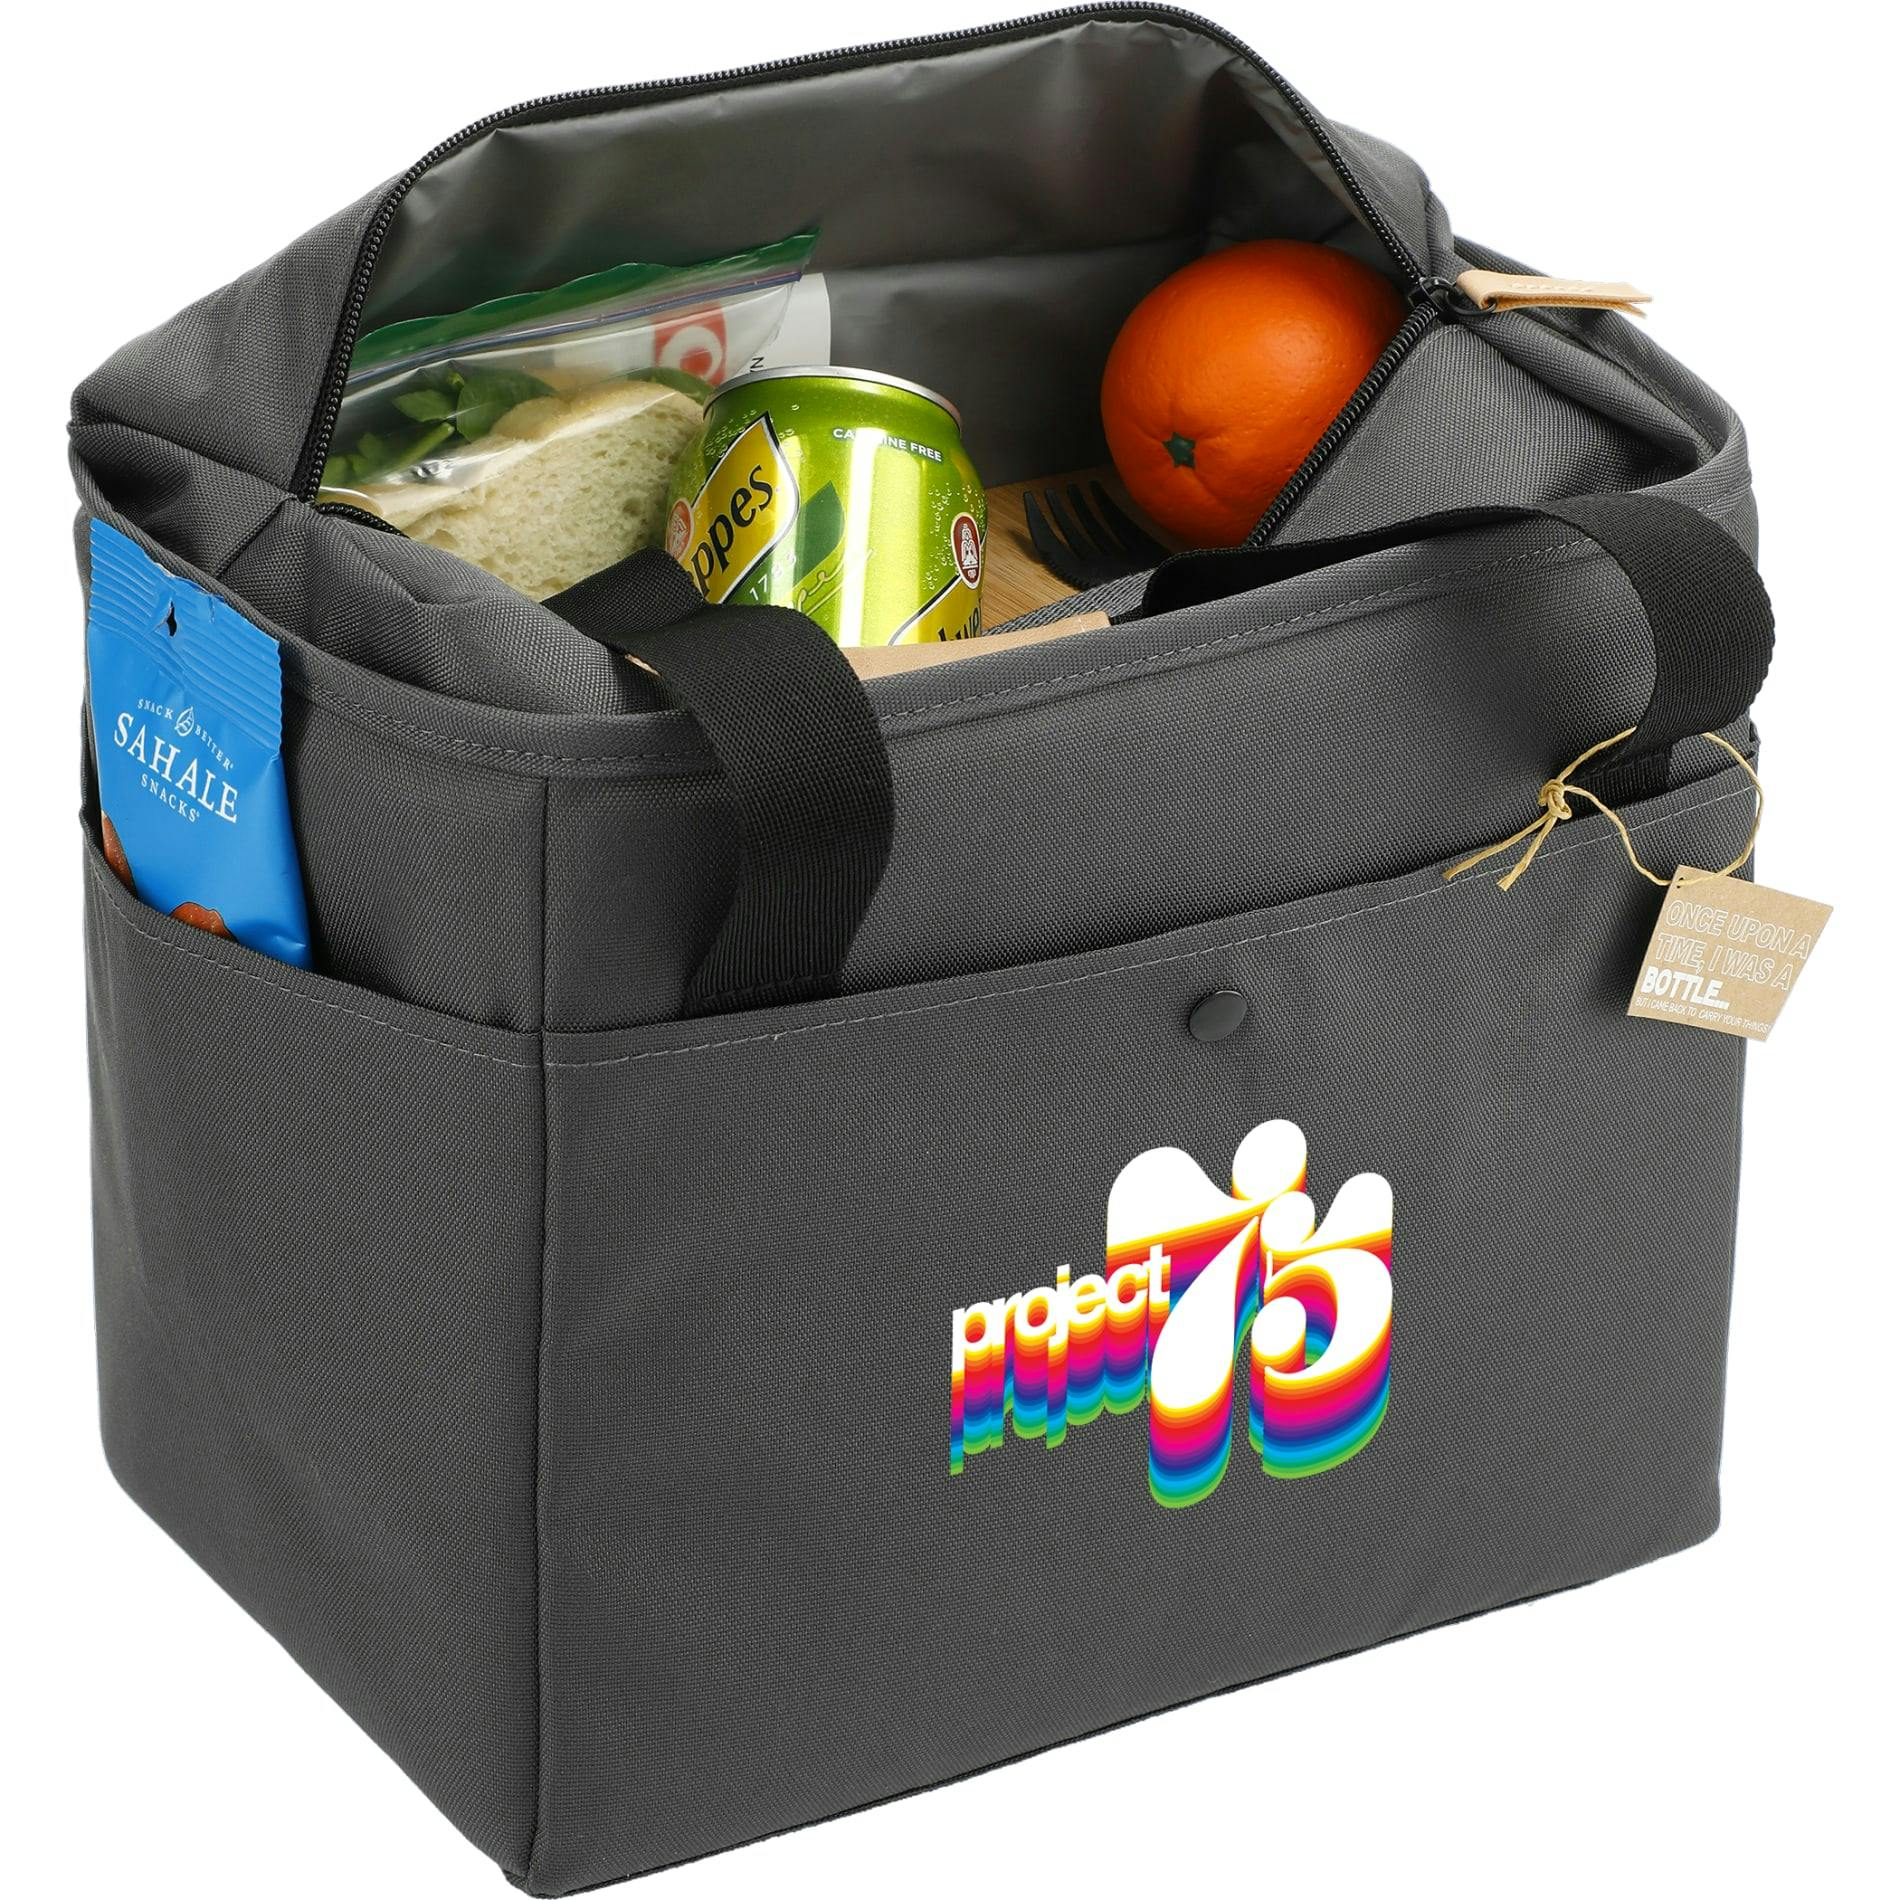 Aft Recycled rPET 12 Can Cooler - additional Image 2